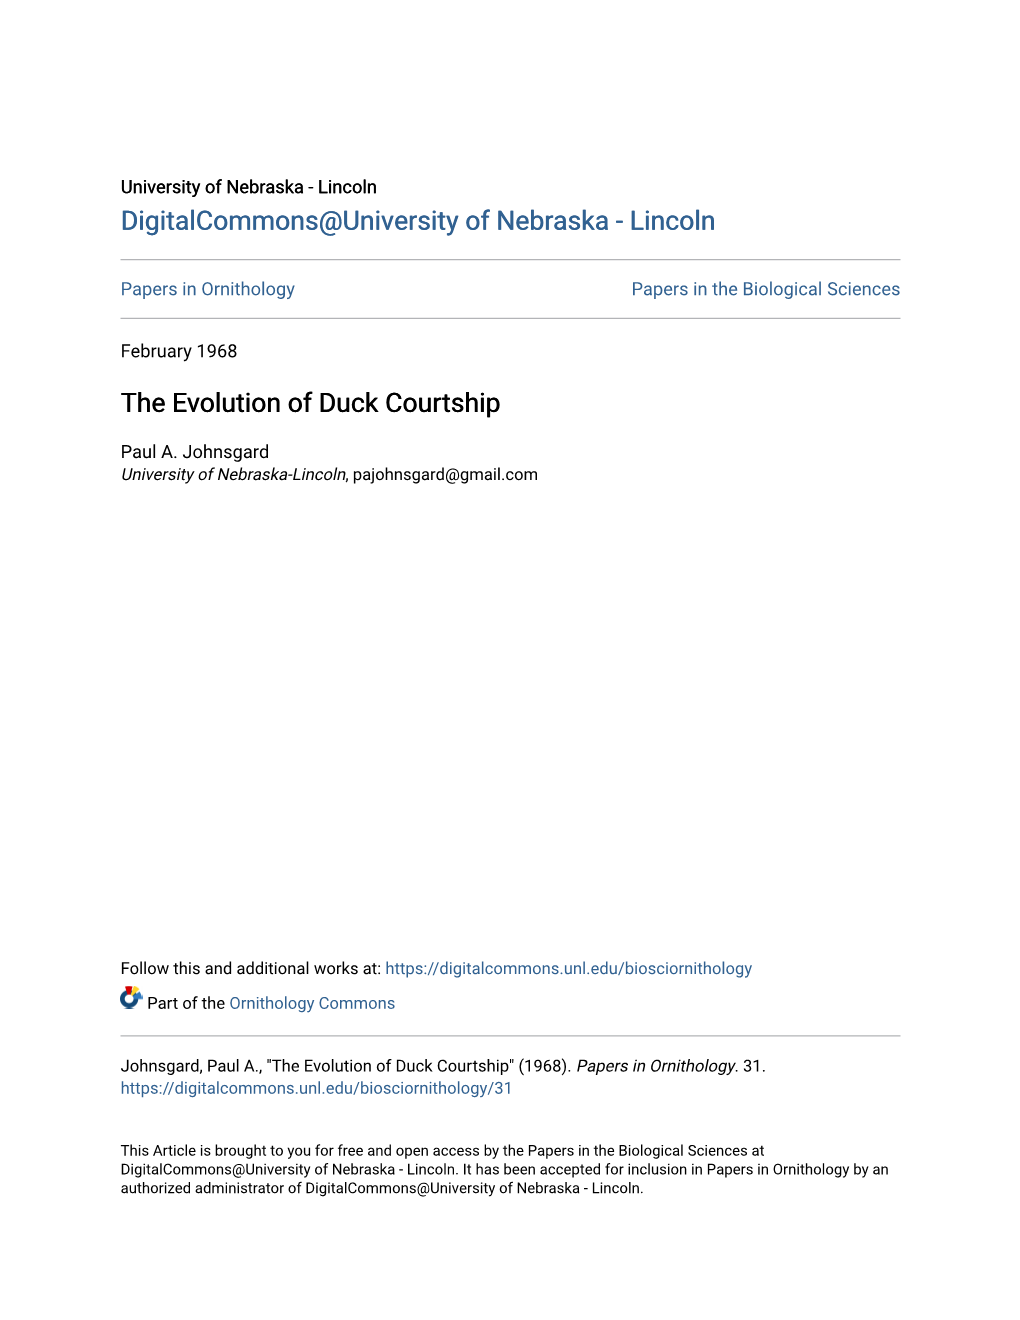 The Evolution of Duck Courtship